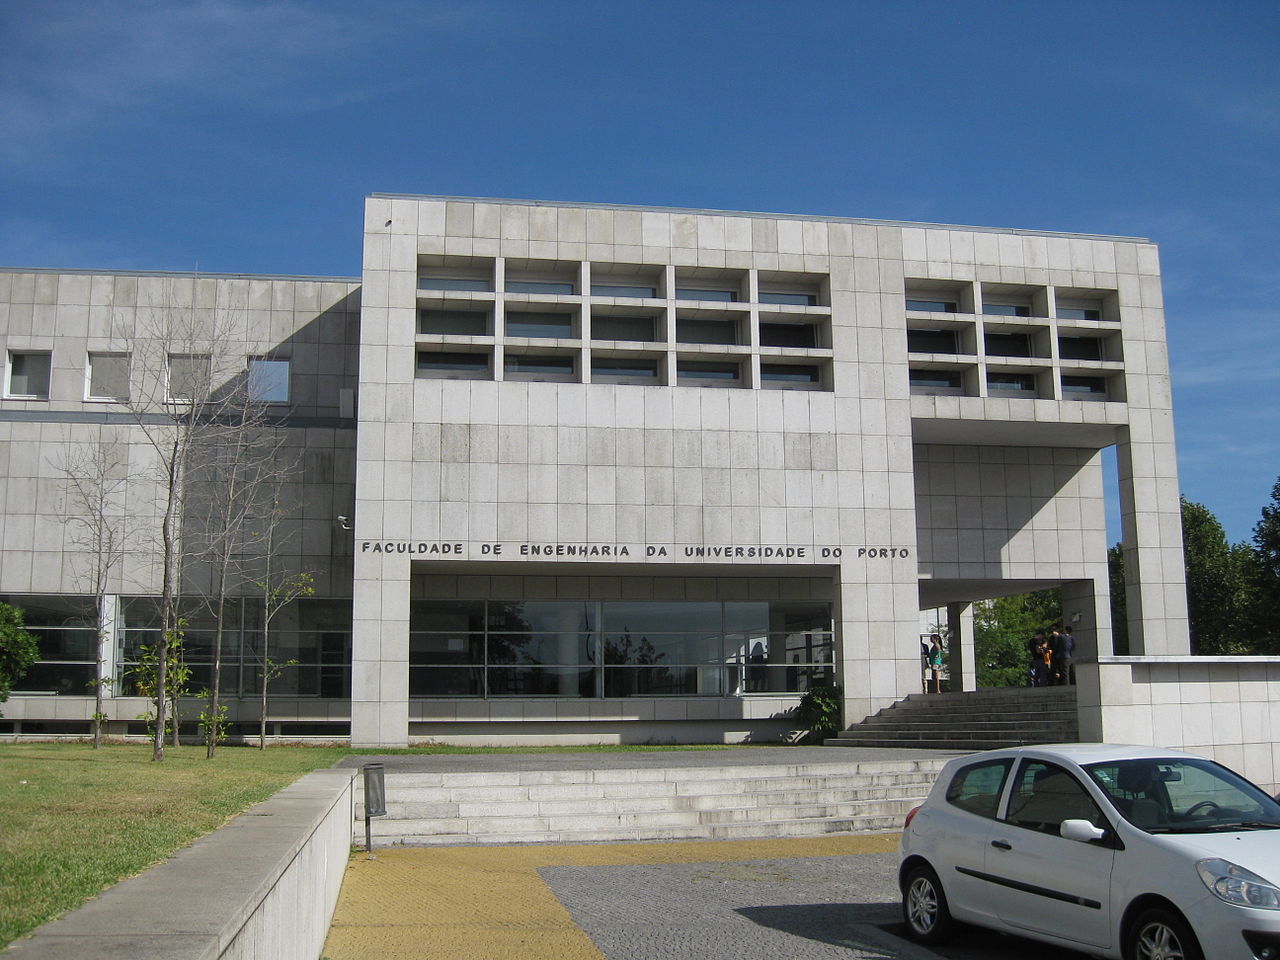 Main entrance of the Faculty of Engineering, University of Porto